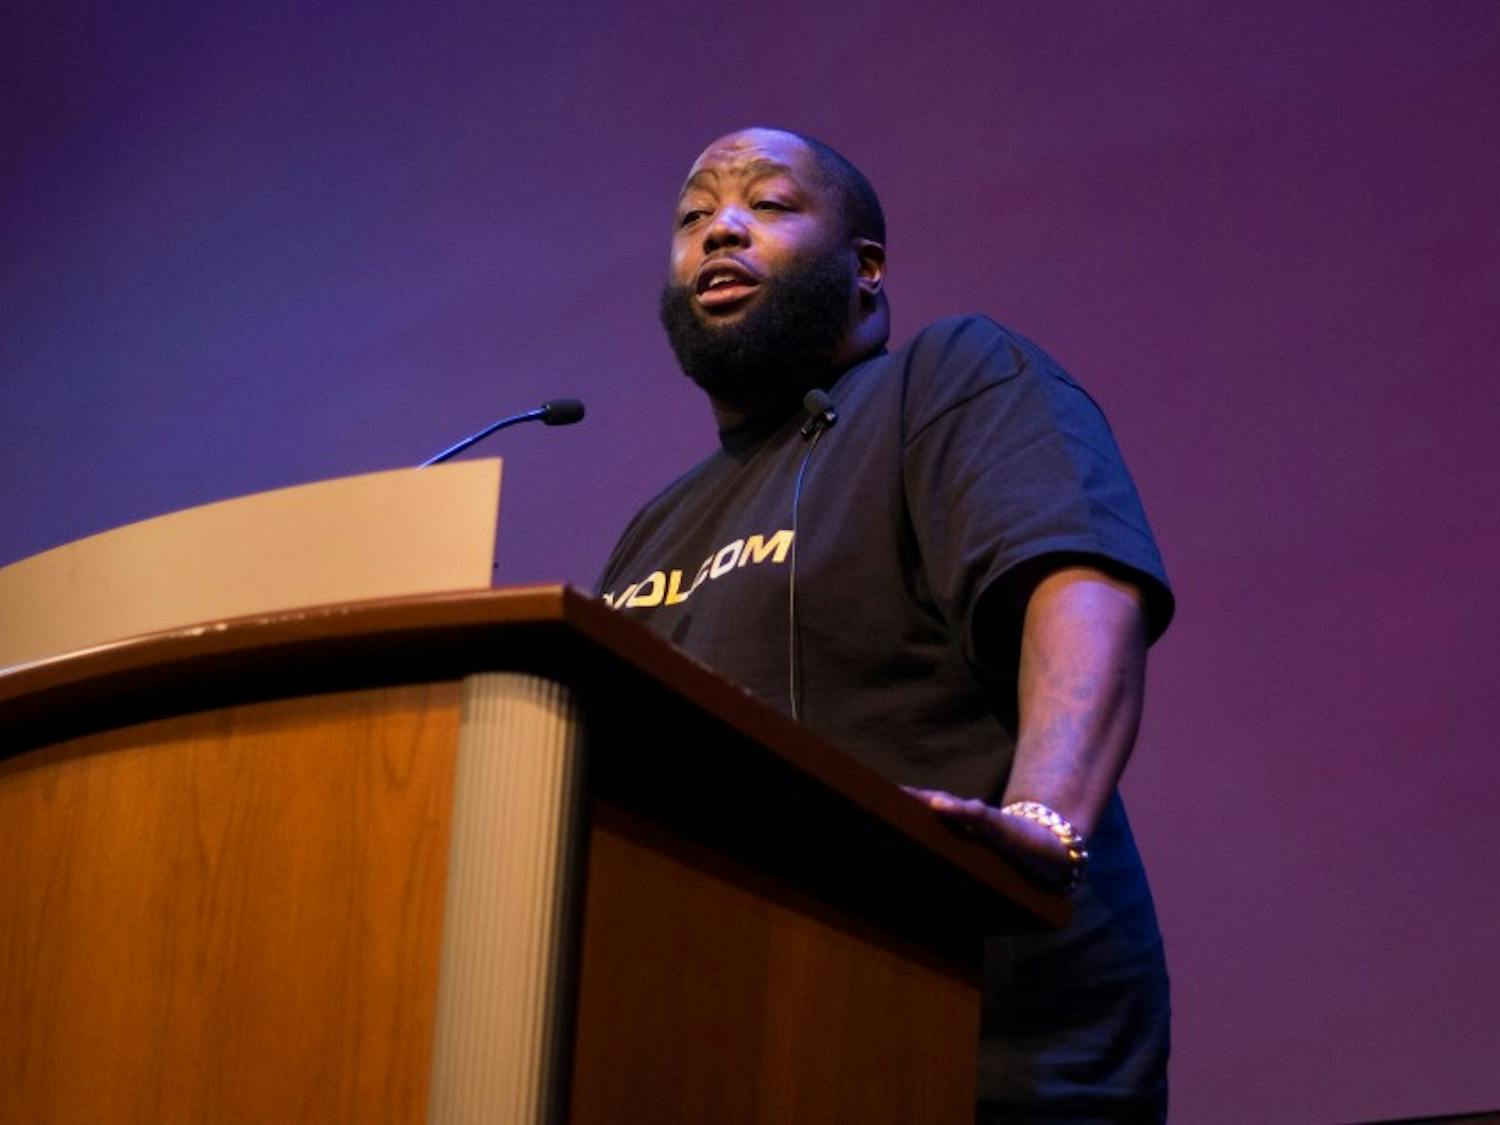 Michael Render, known as rapper Killer Mike, shared his thoughts on systemic racism and police brutality during his Distinguished Lecture Series Talk Monday.